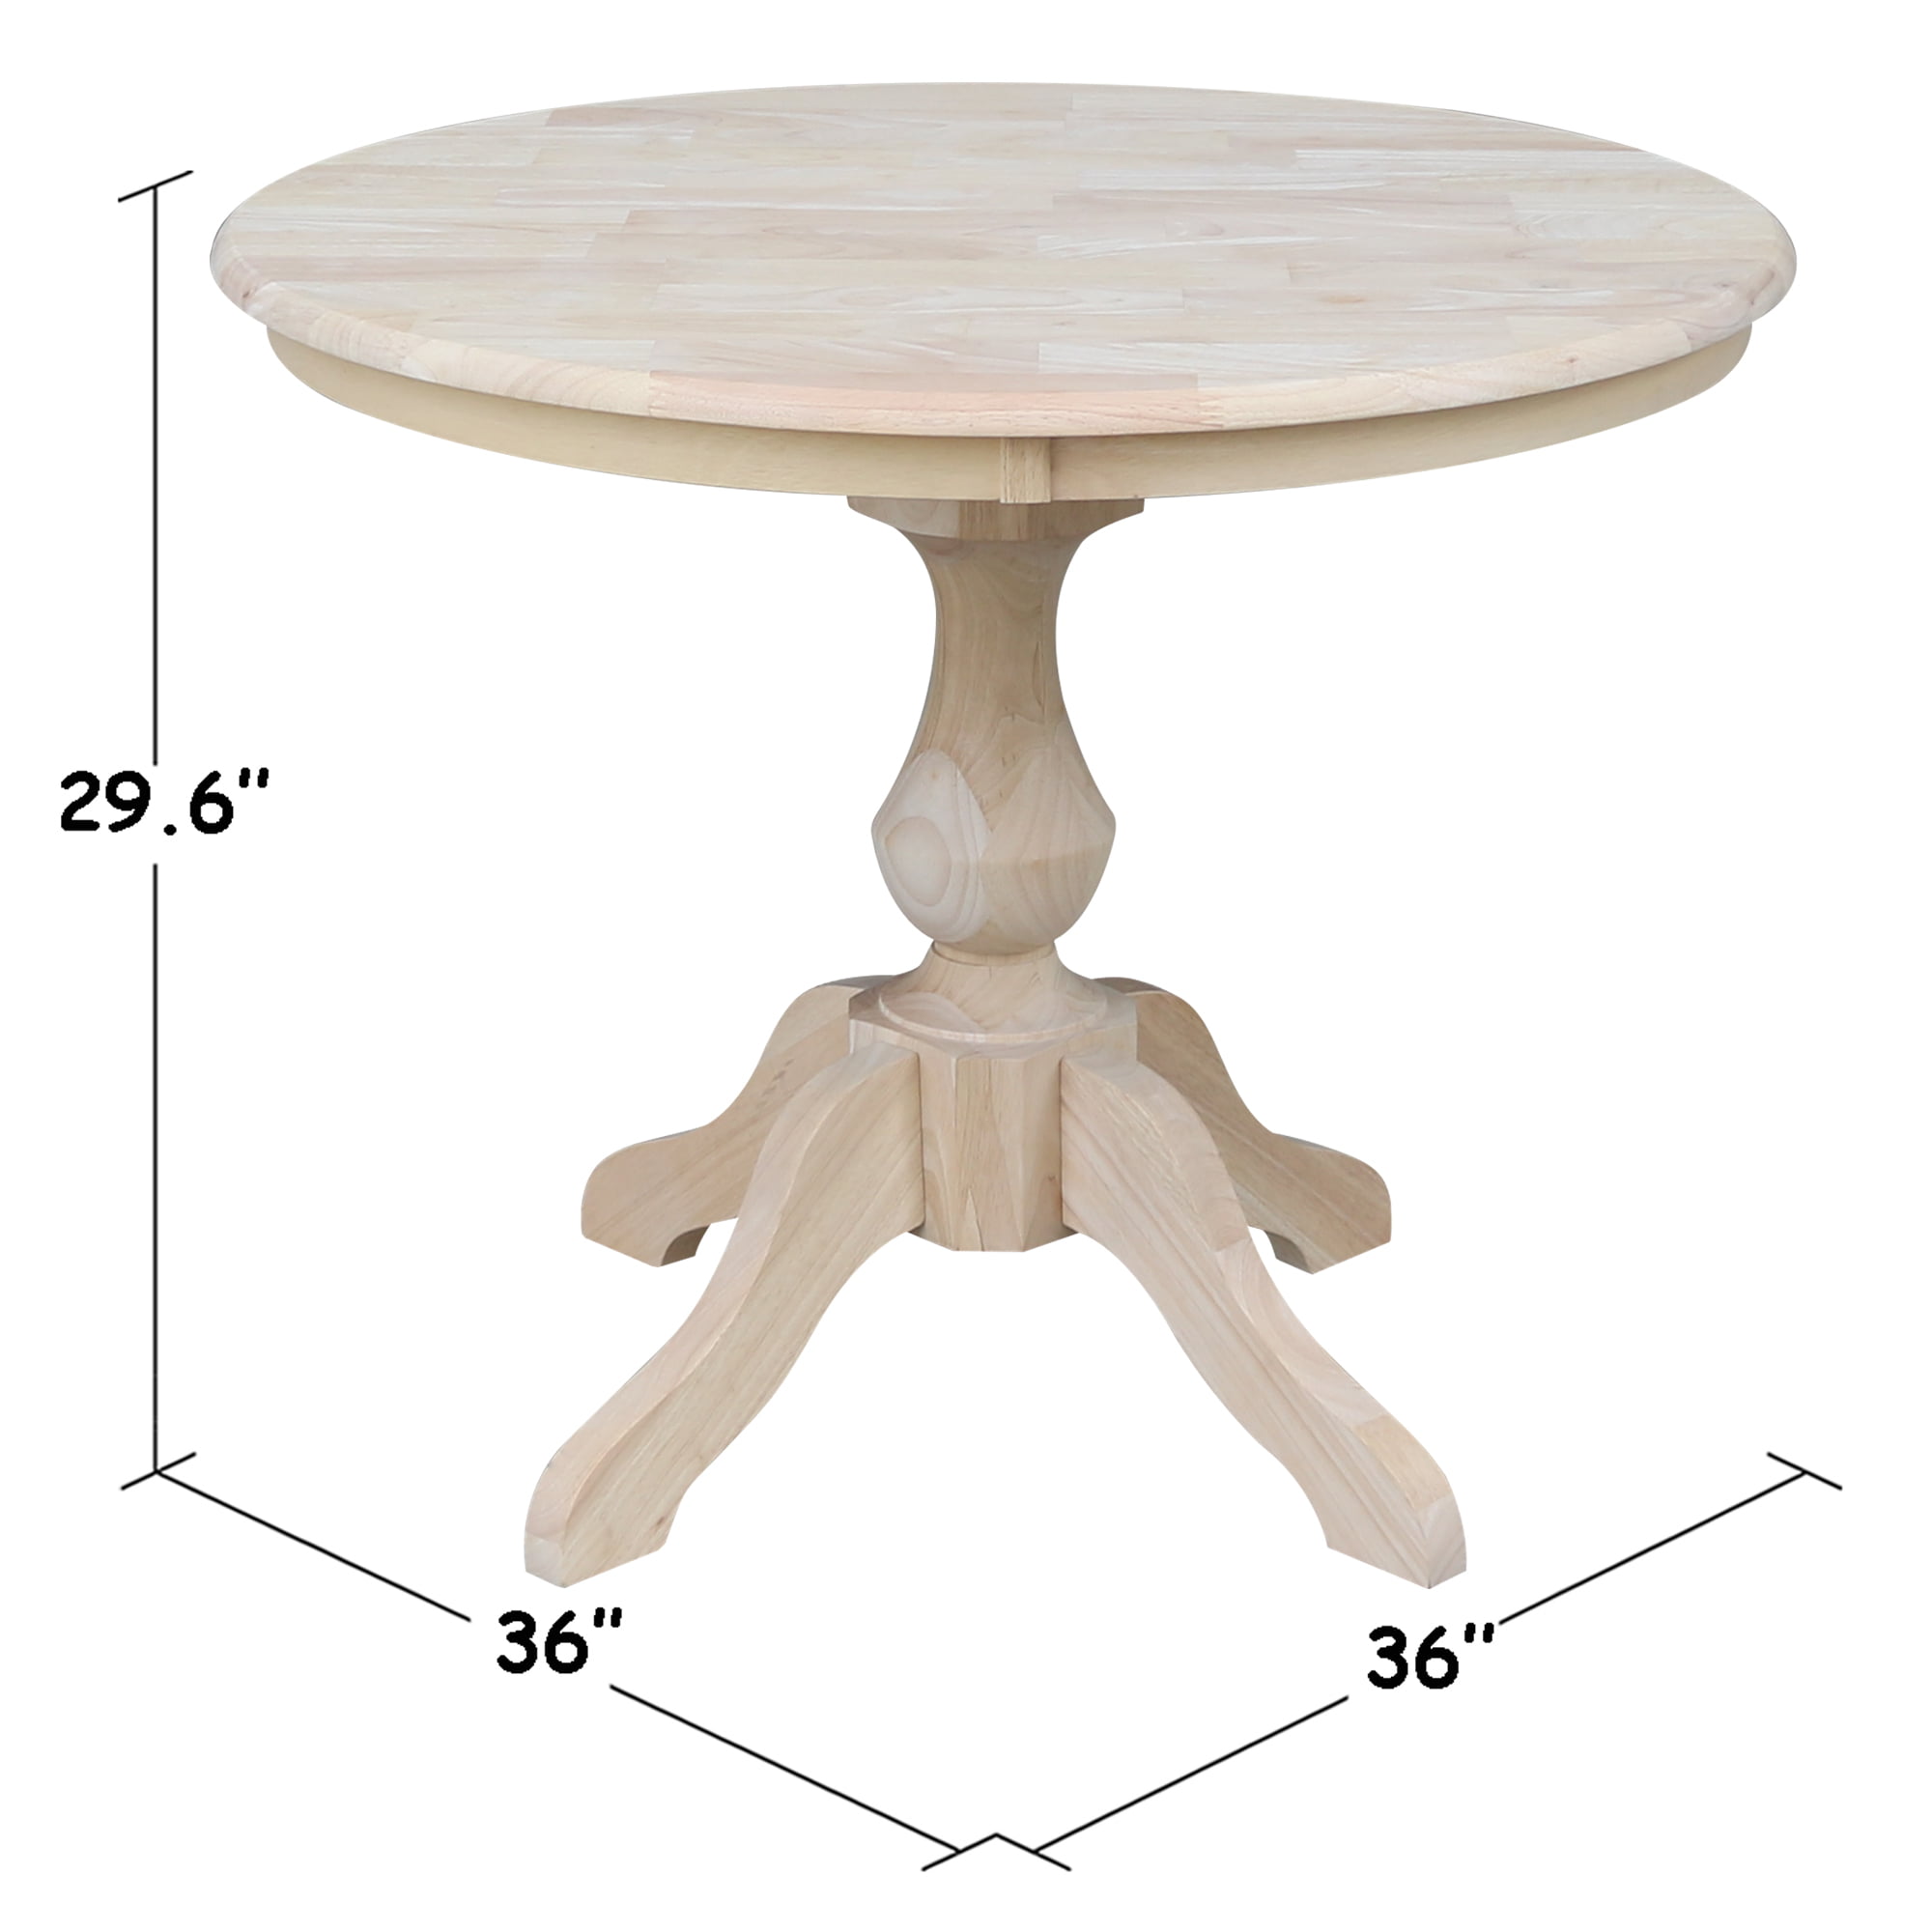 36 Round Top Pedestal Dining Table Unfinished Walmartcom